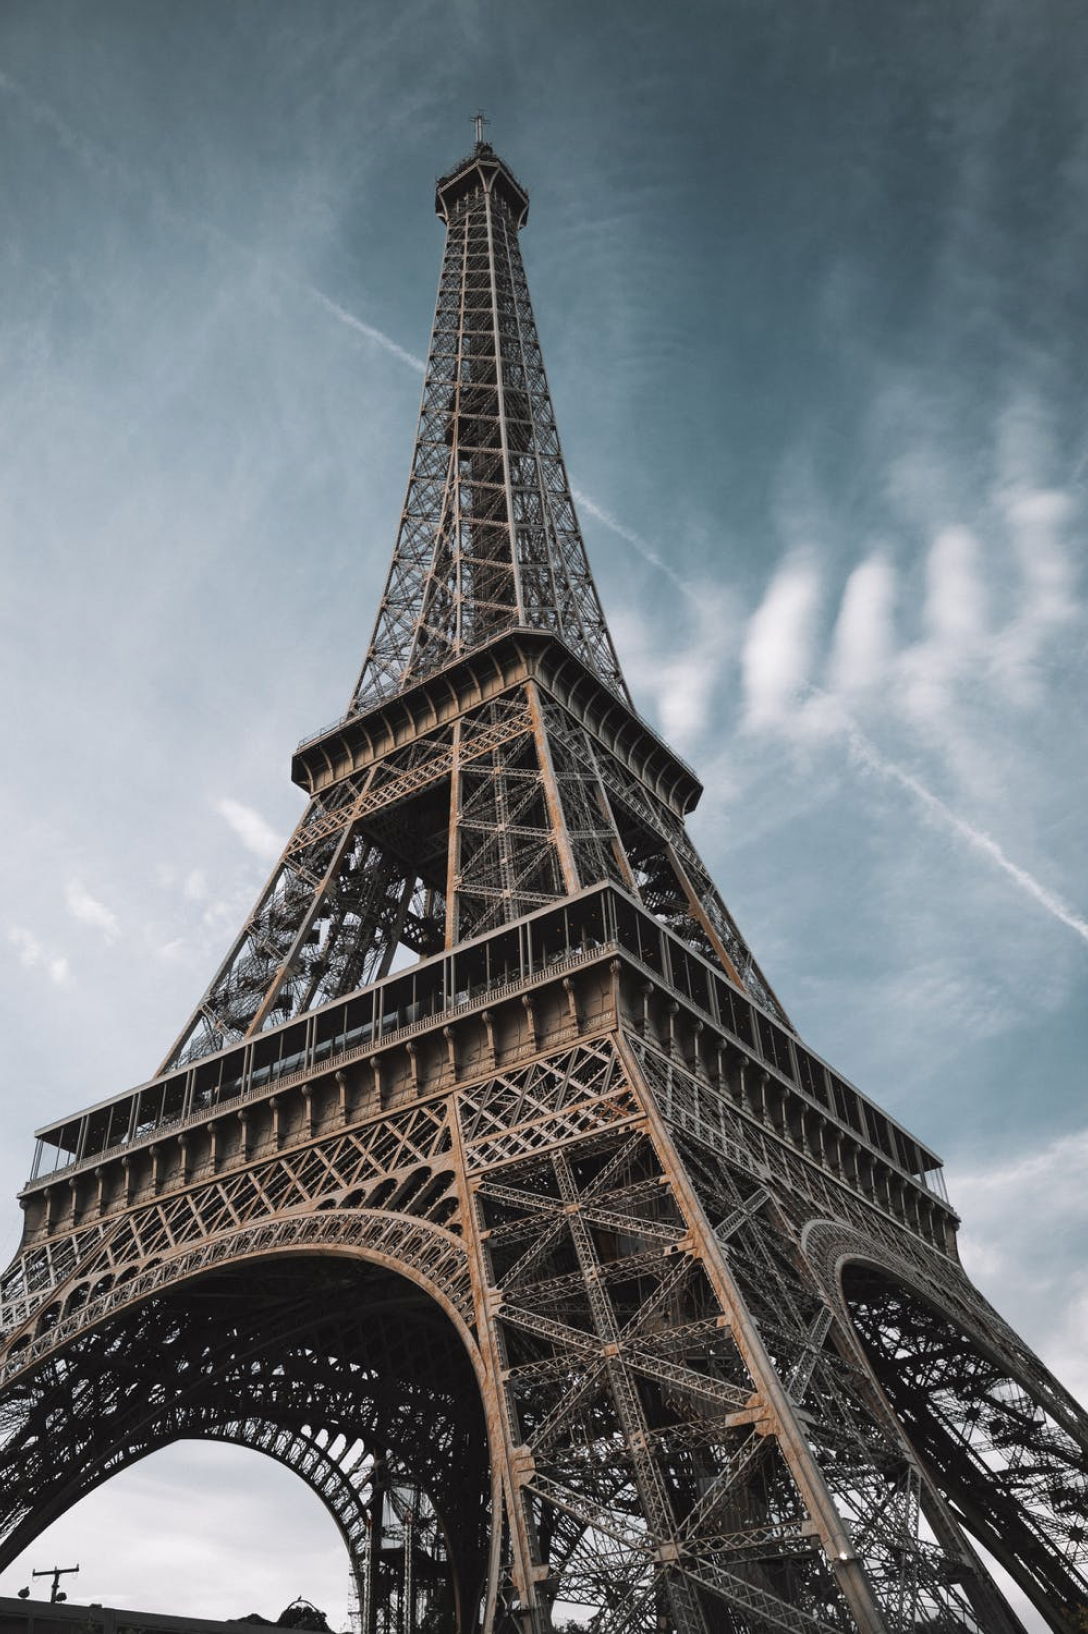 Image of the eiffel tower